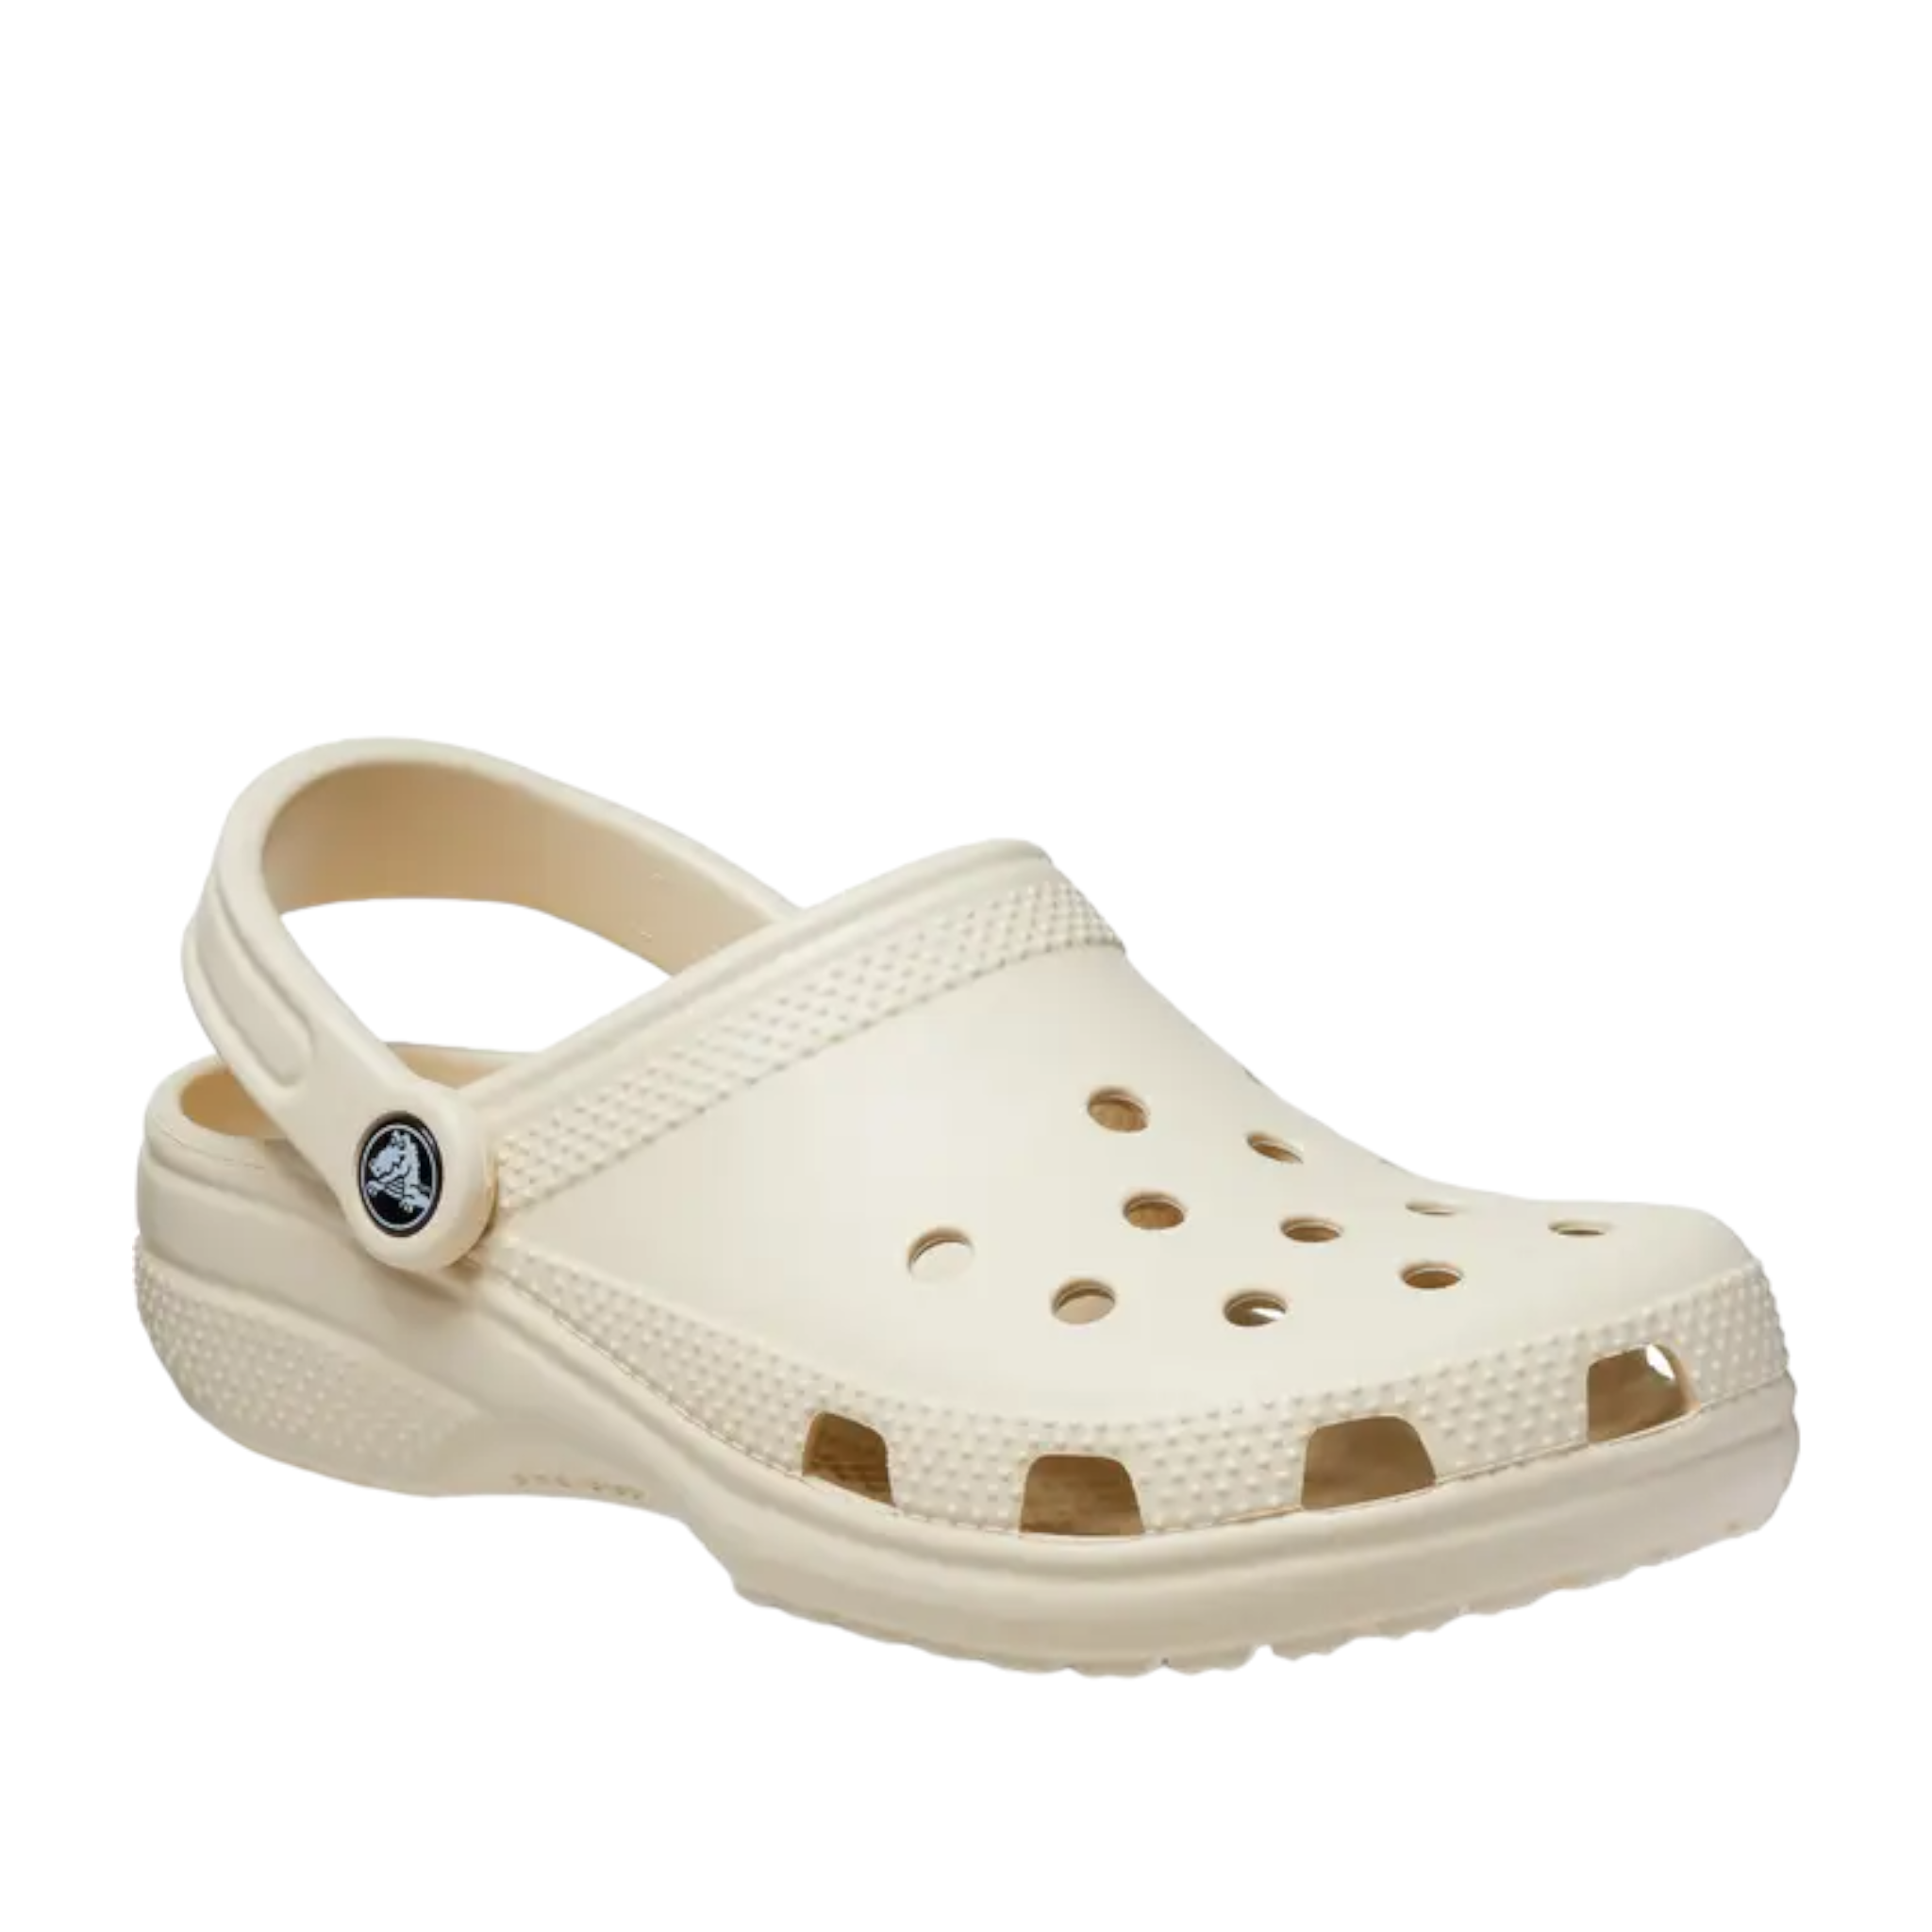 Crocs Classic Clogs online and instore with shoe&me Mount Maunganui. Shop Bone Clogs